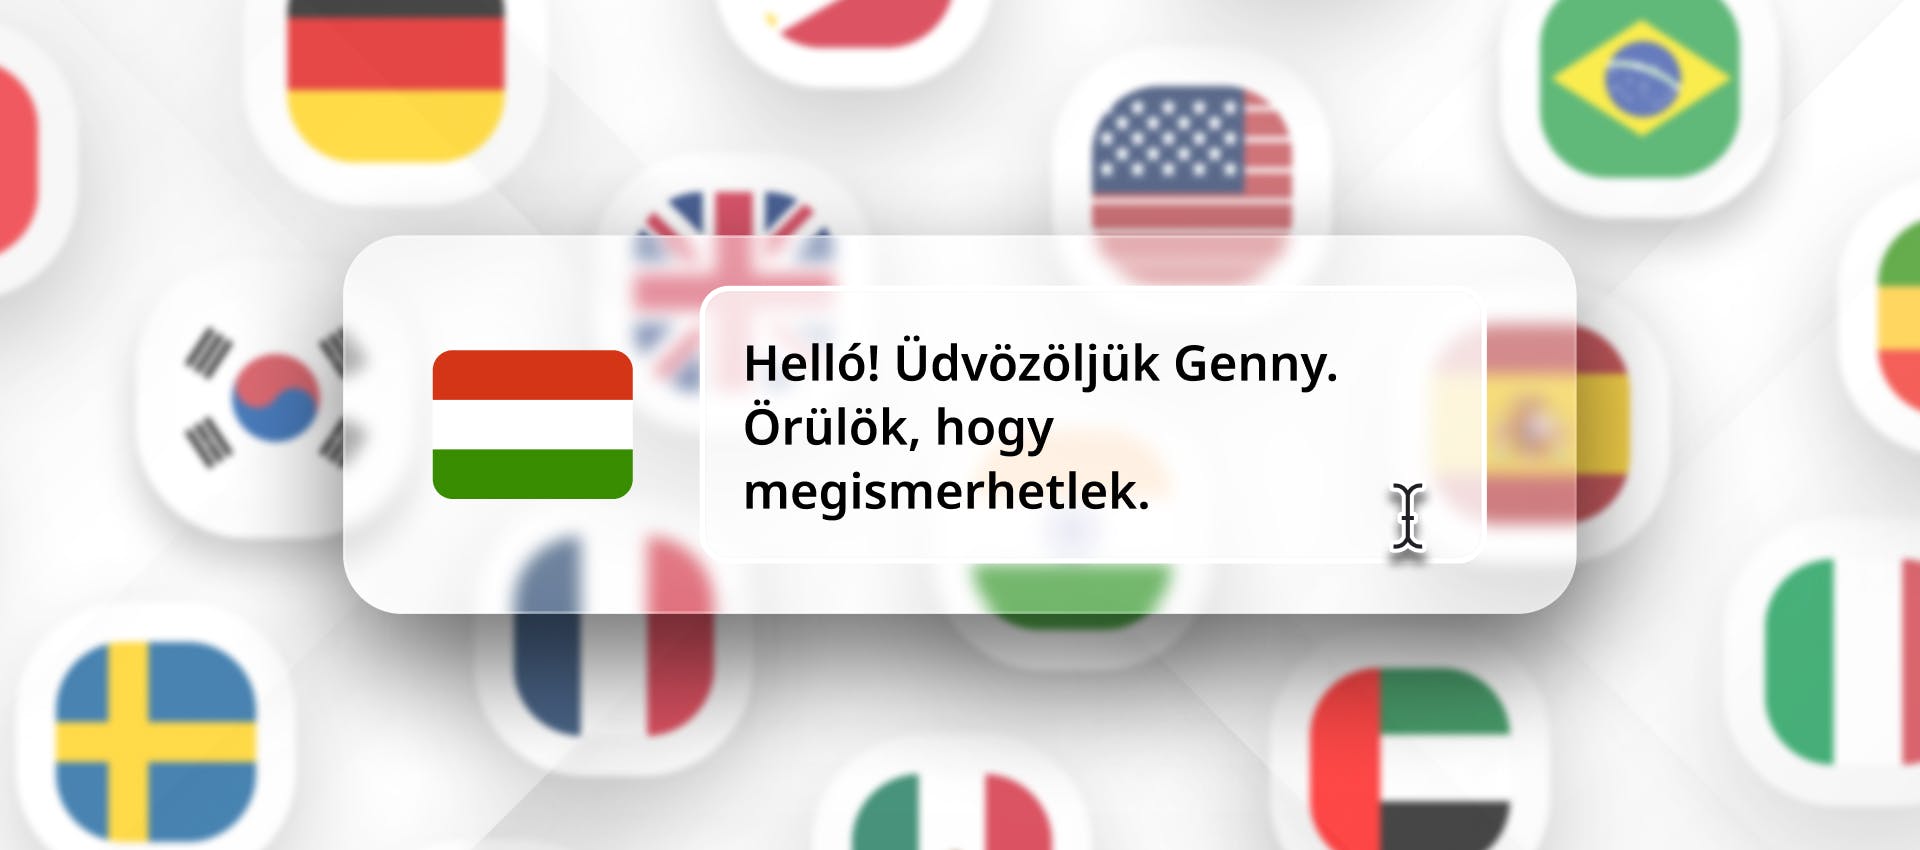 Hungarian phrase for Hungarian TTS generation with different flags in the background